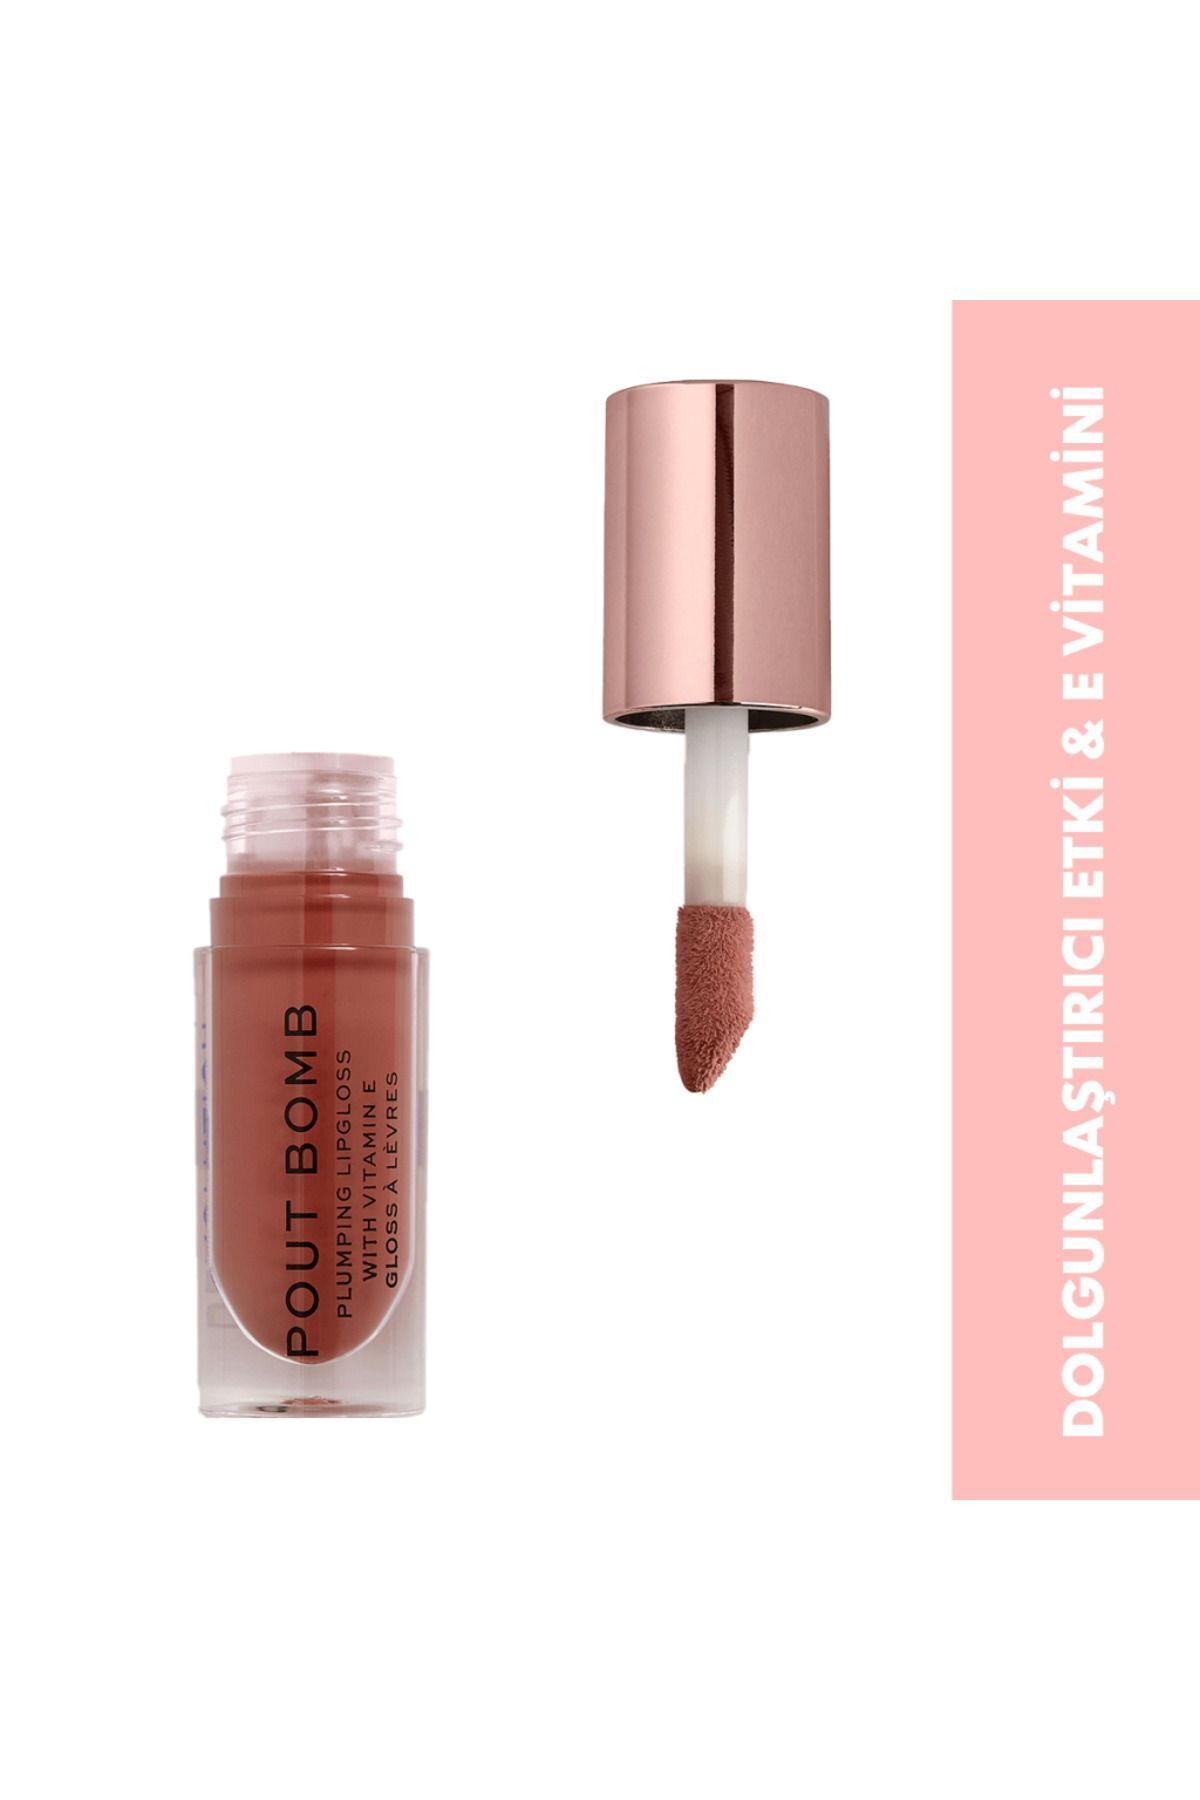 Revolution Pout Bomb Plumping Cookie Gloss